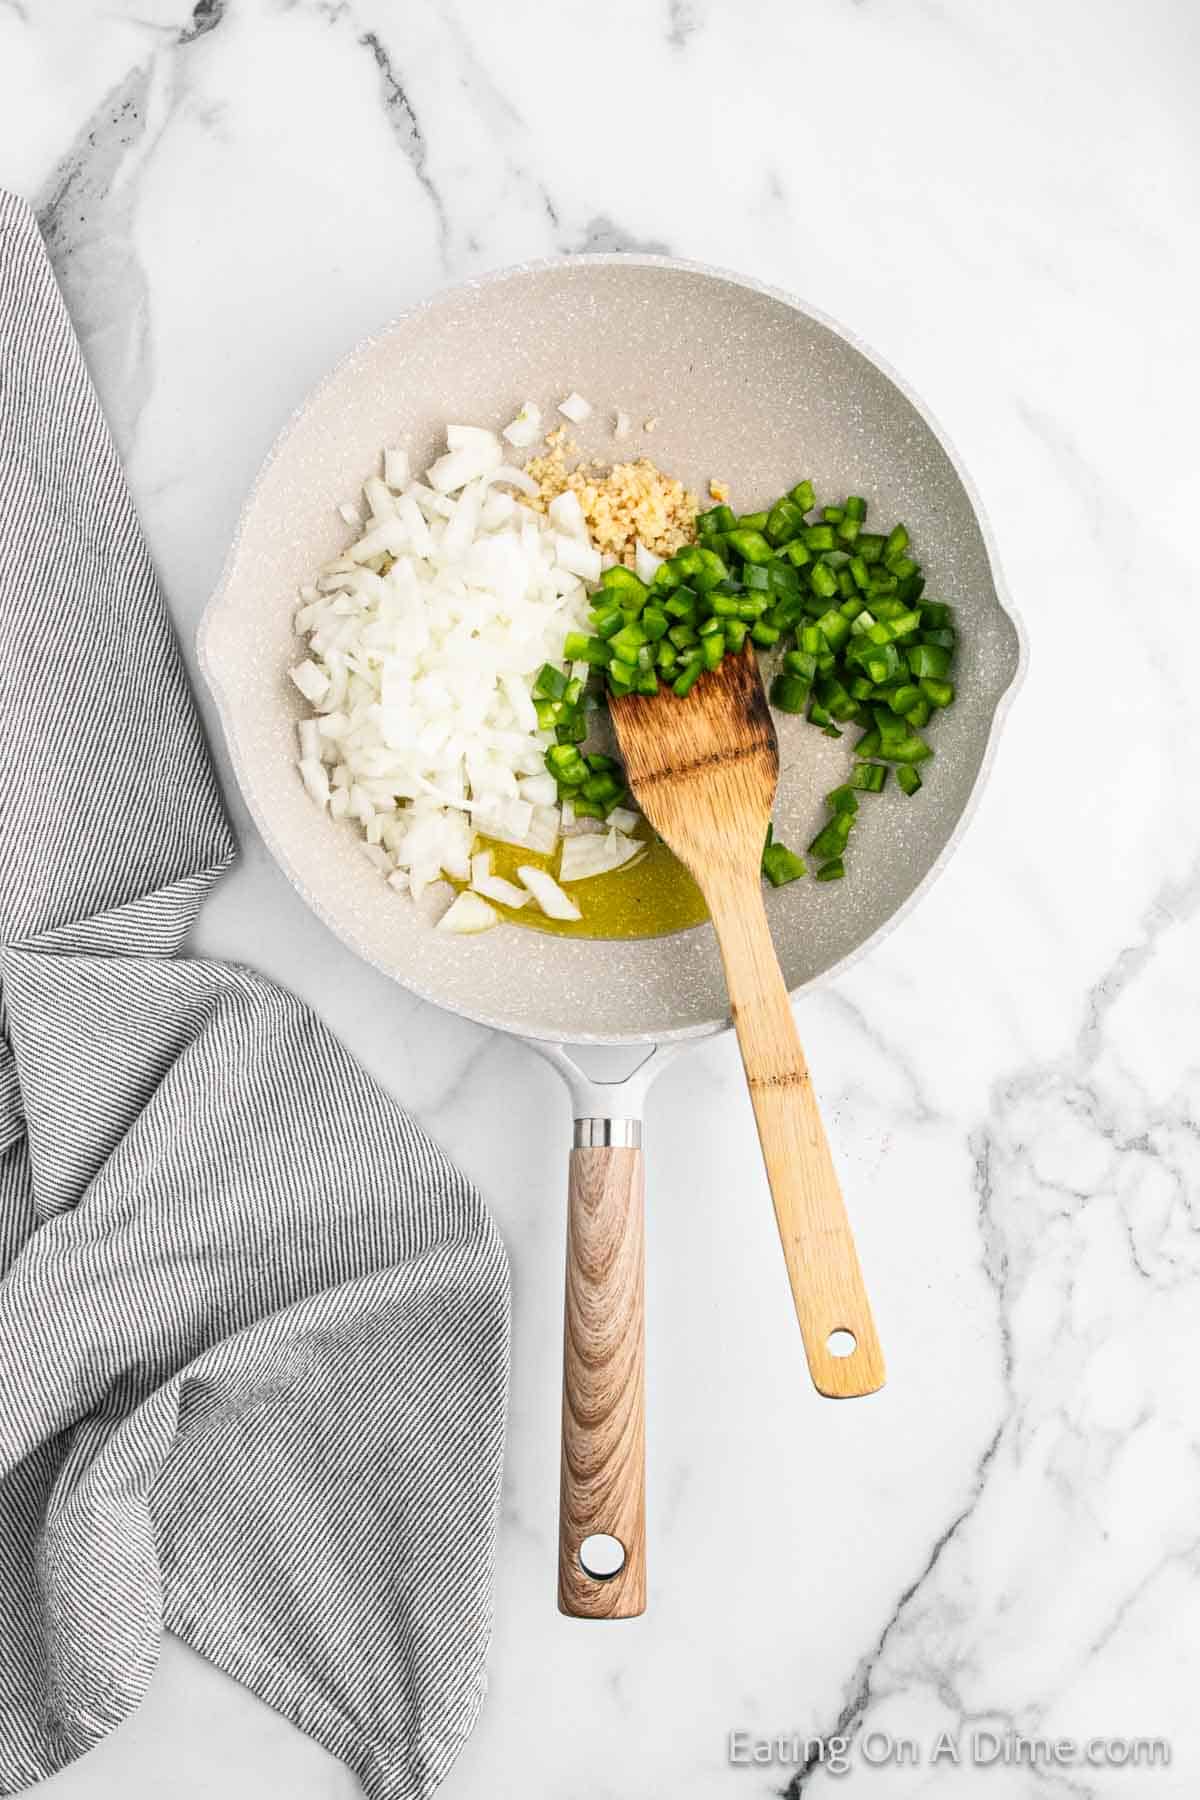 A frying pan with chopped onions, minced garlic, and diced green bell peppers sits on a marble countertop, ready to make beef chimichangas. A wooden spatula rests in the pan, and a gray dish towel is draped nearby.